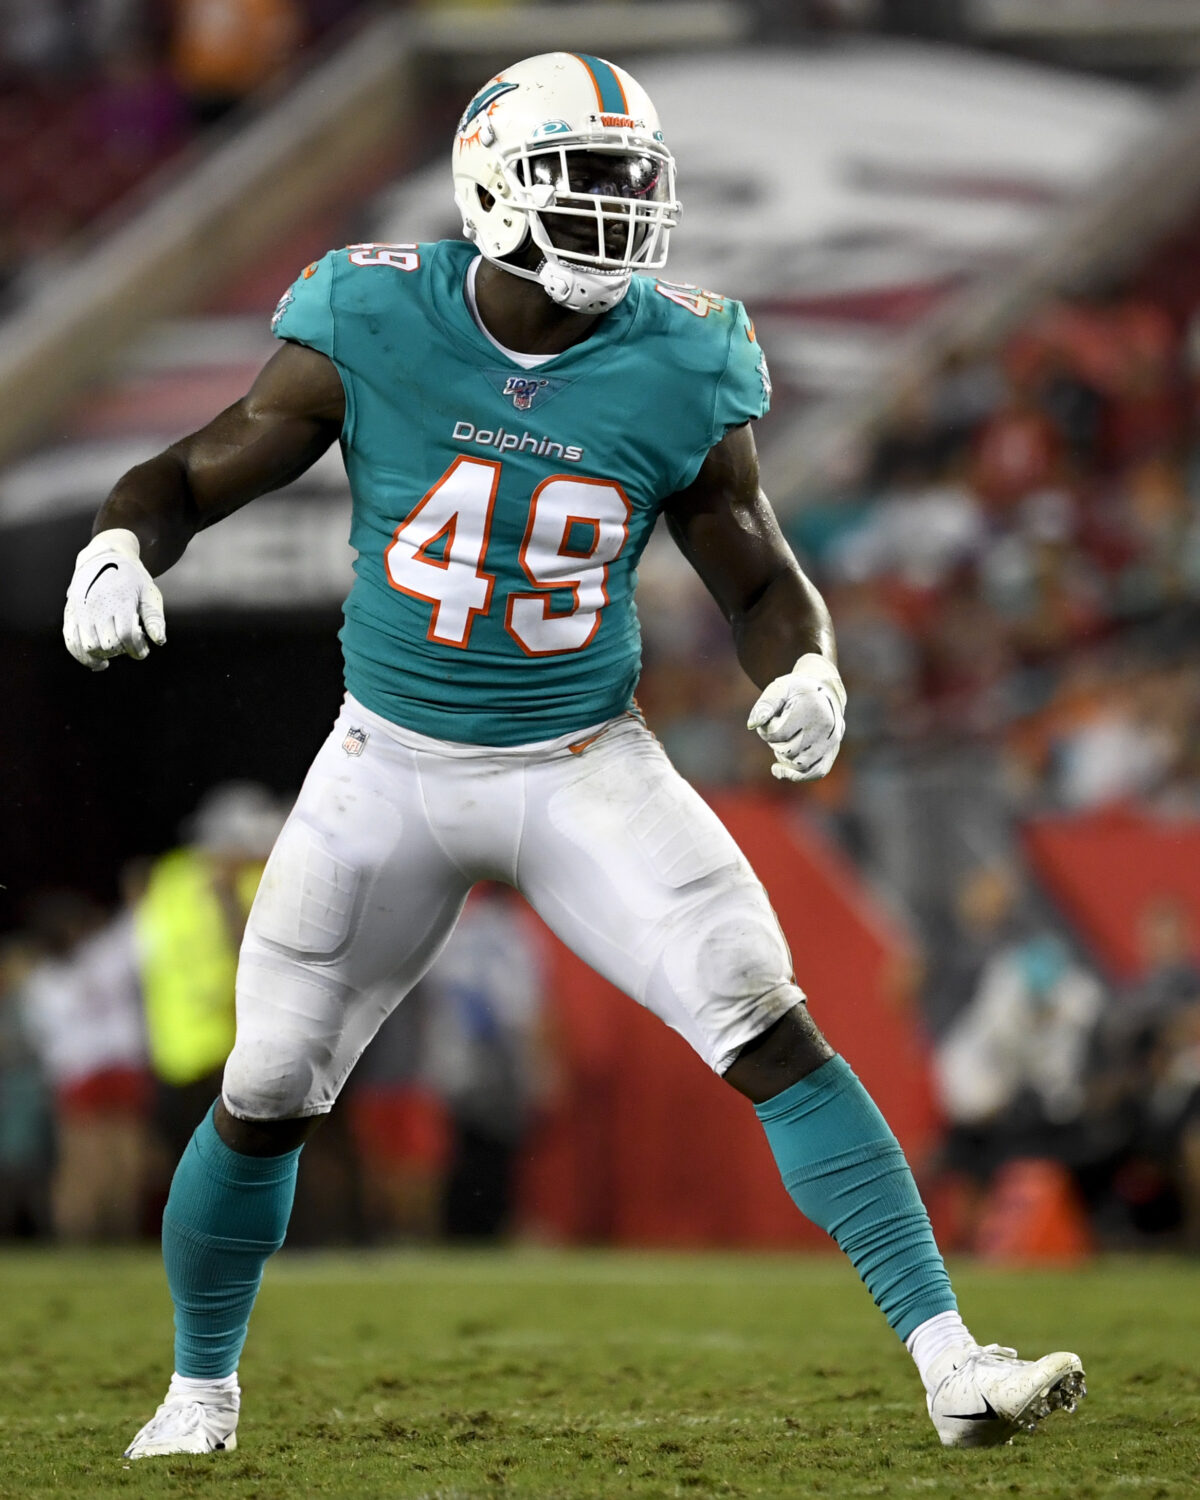 Report: Dolphins re-signing LB Sam Eguavoen to a one-year deal